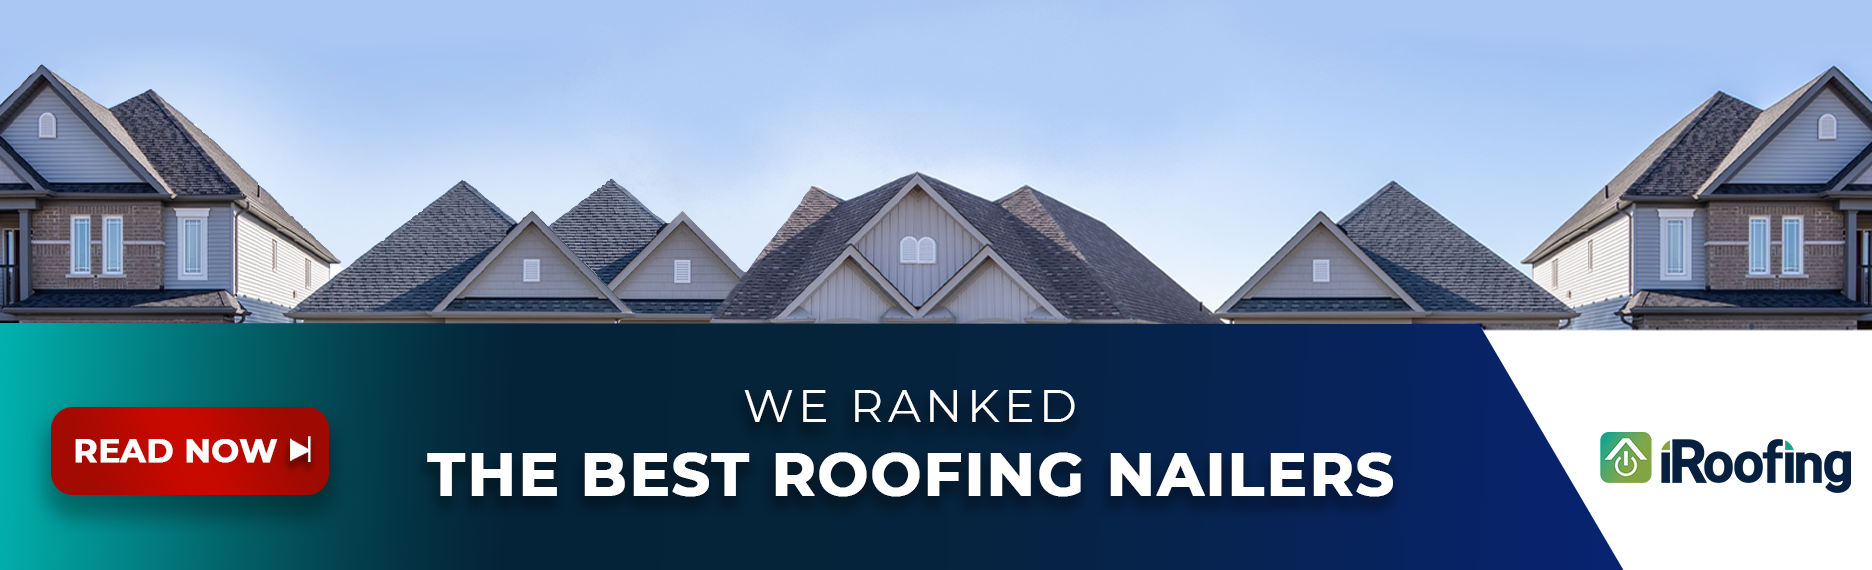 Roofing software banners